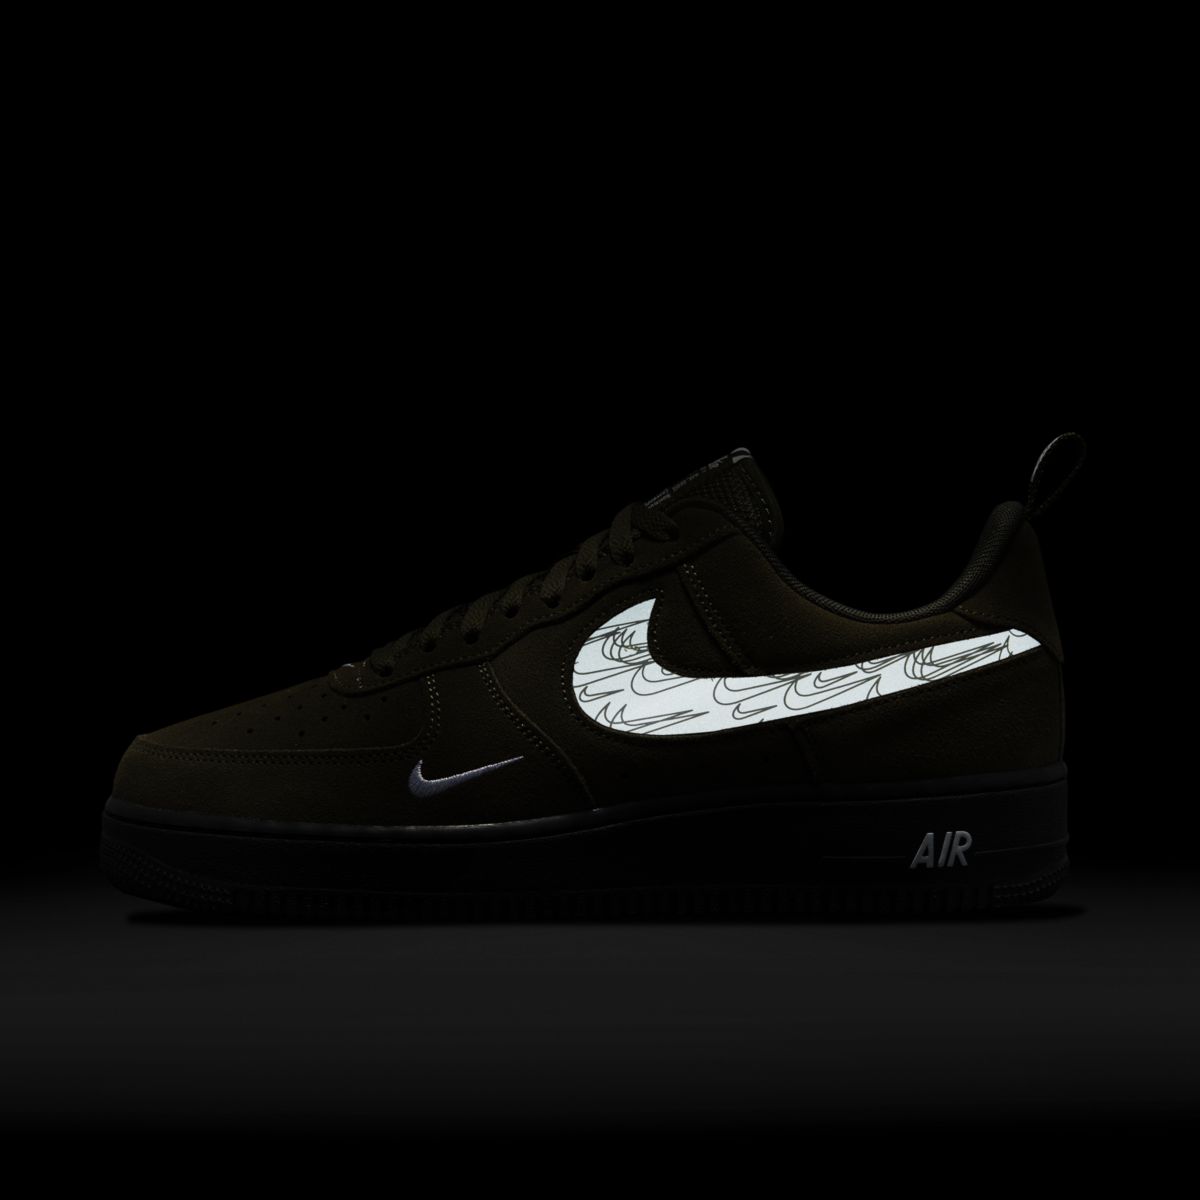 Nike Air Force 1 Low Olive Suede DZ4514-300 10